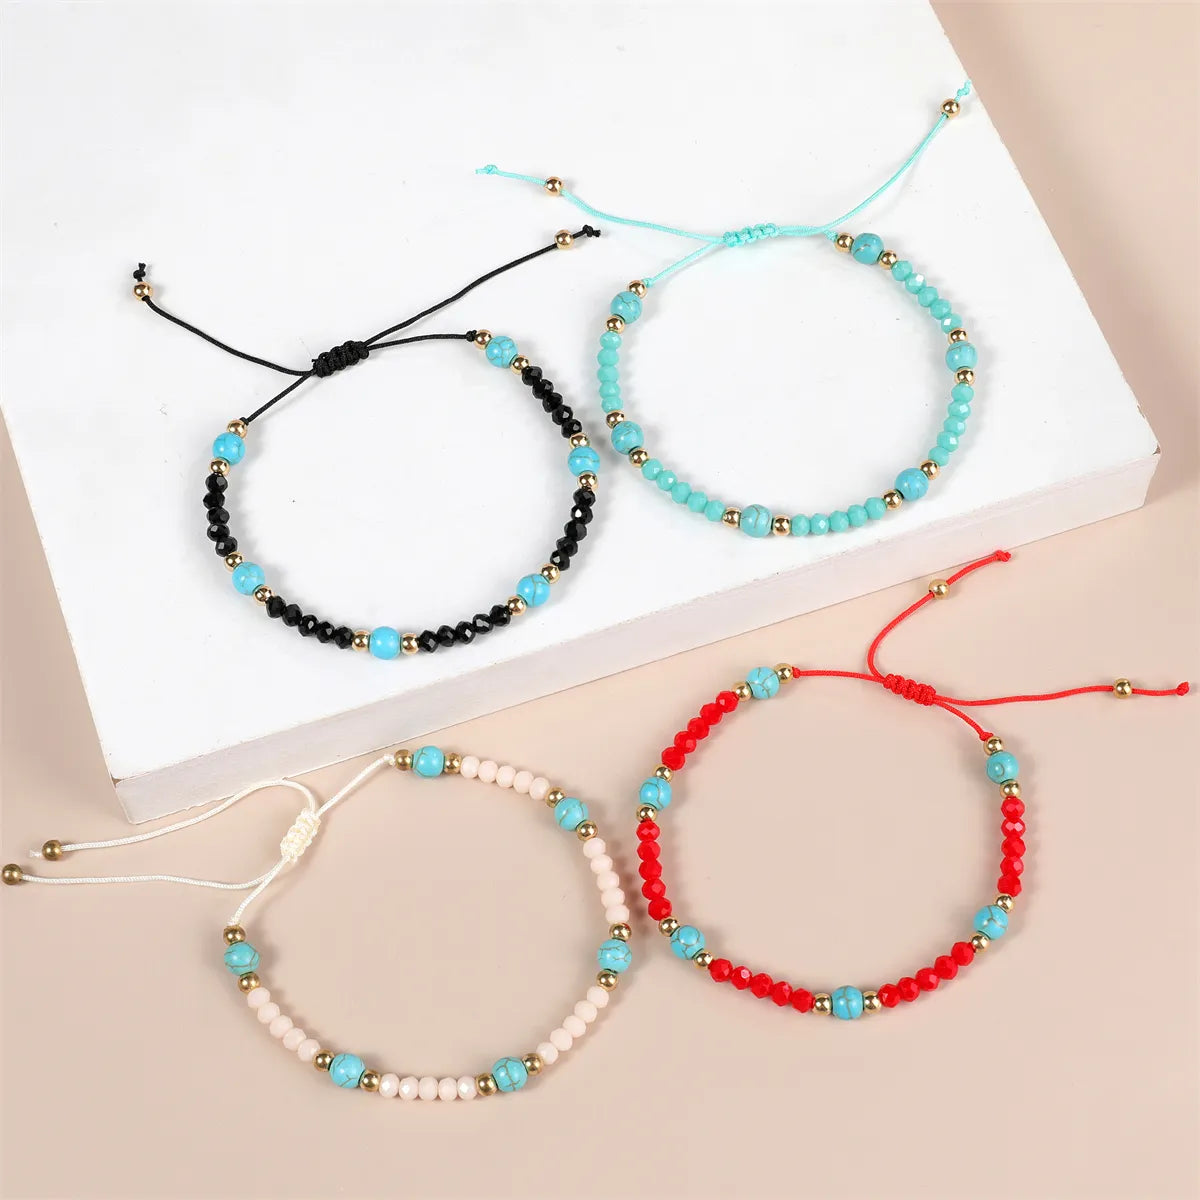 Handwoven Chain Natural Stone Turquoise Crystal Beads Charms Bracelet Beaded Aromatherapy Bracelets Men Women Jewelry